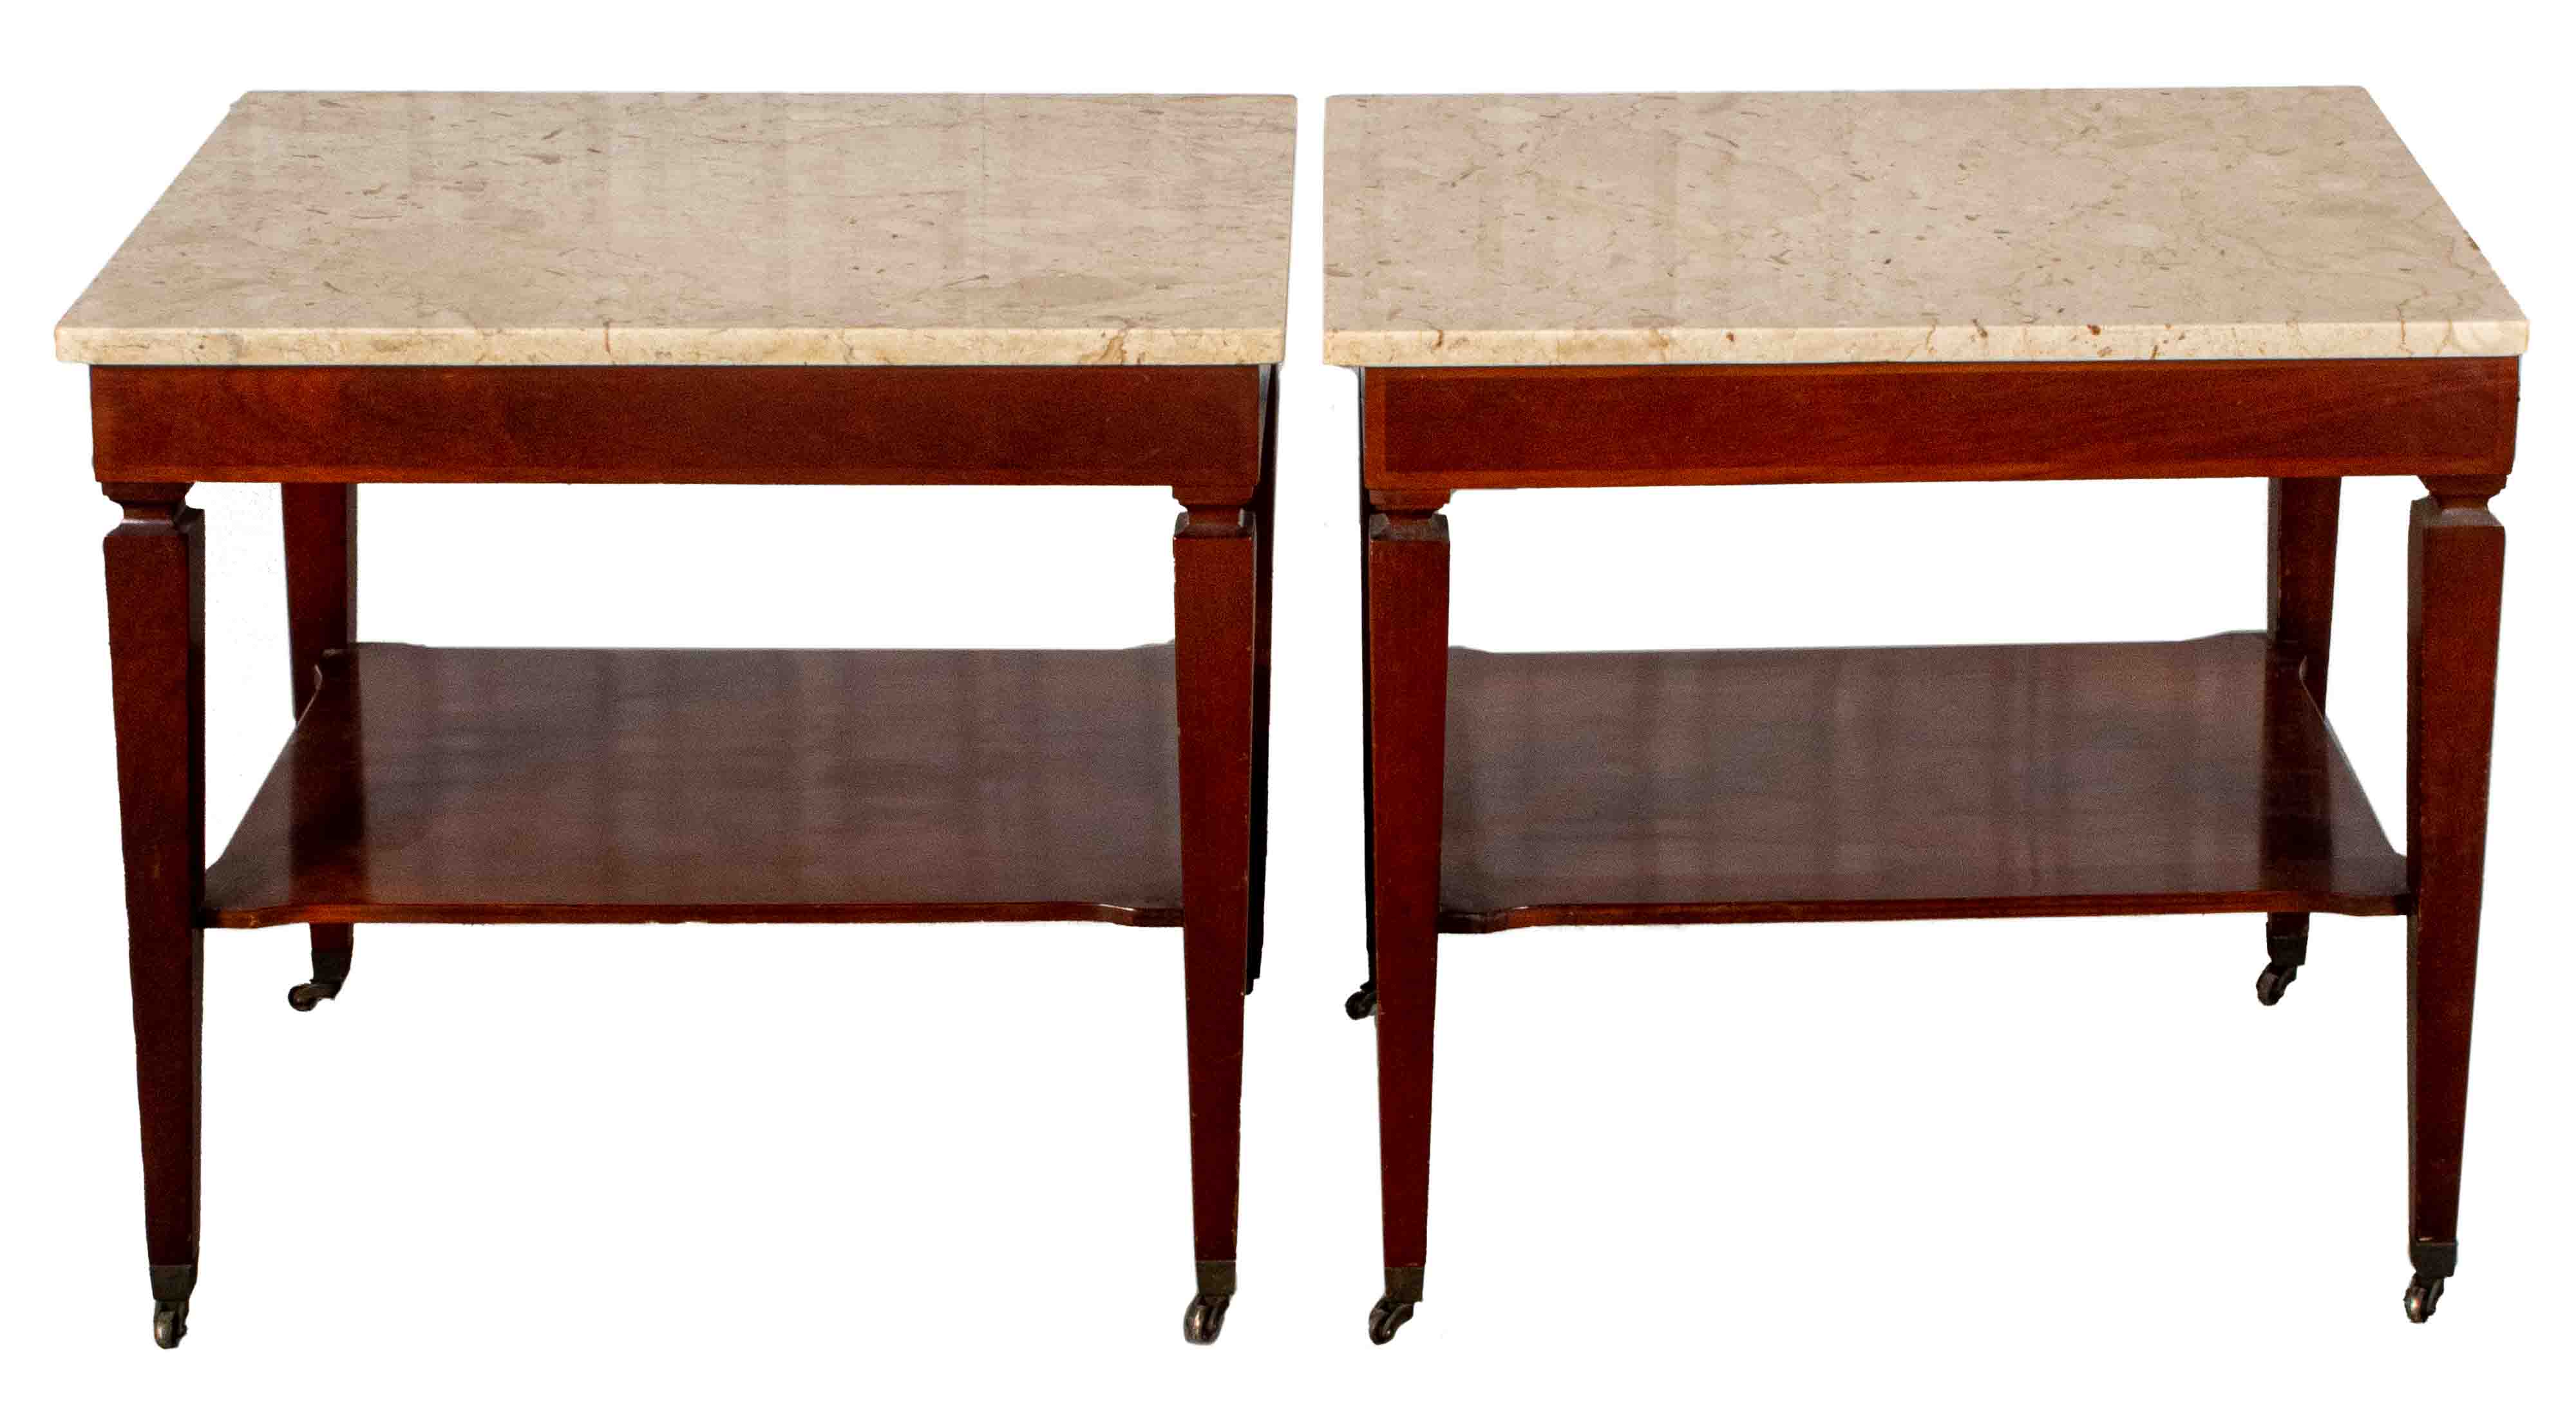 NEOCLASSICAL REVIVAL SIDE TABLES